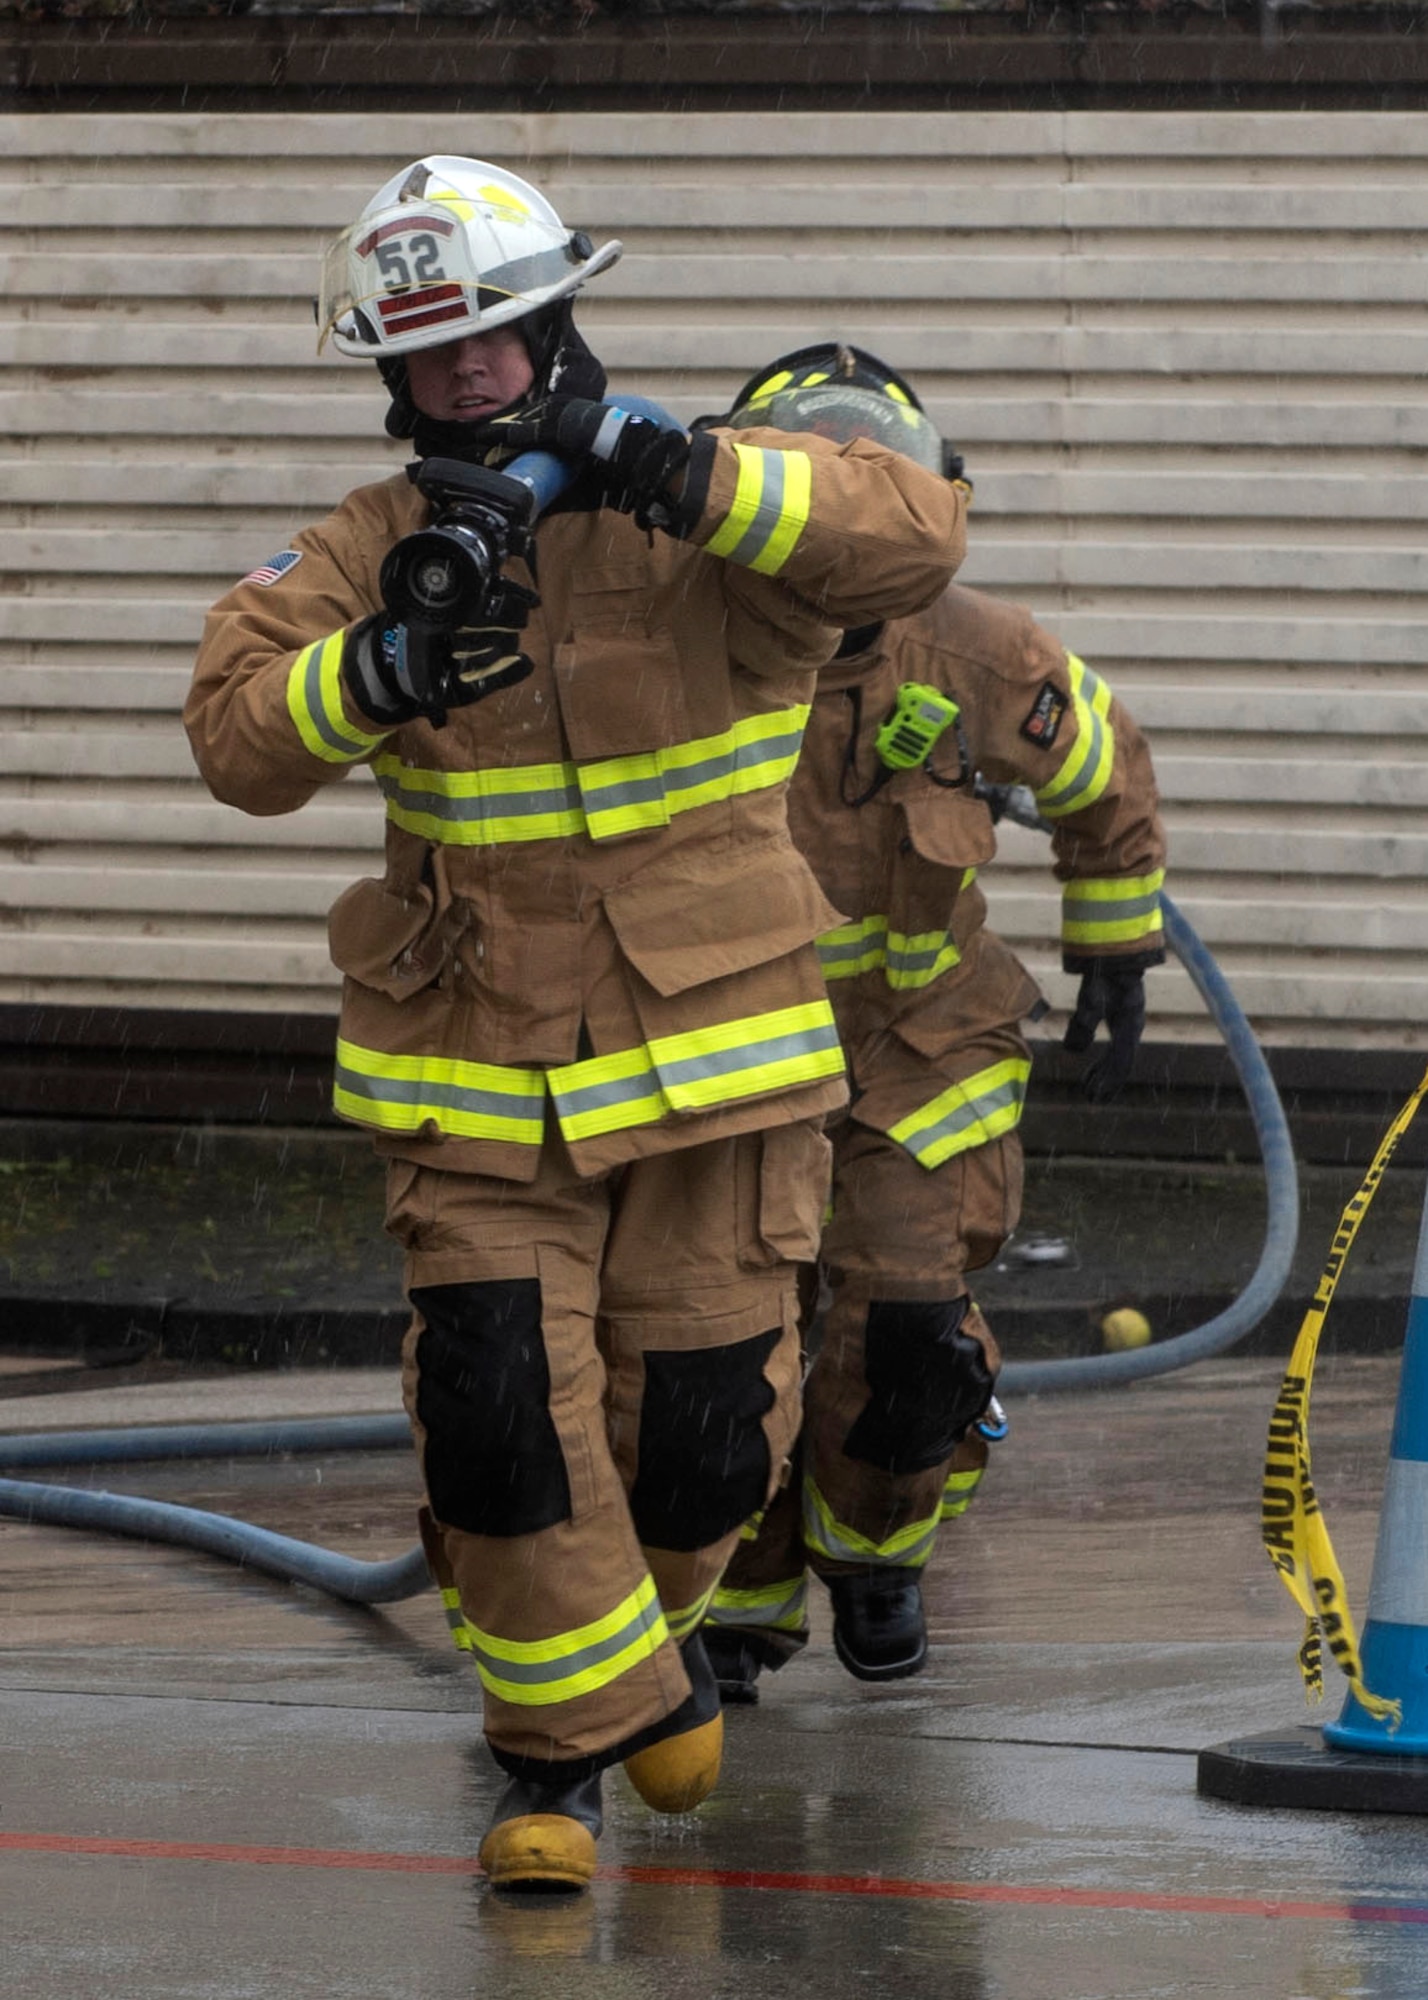 U.S. Air Force Col. David Epperson, 52nd Fighter Wing commander, participates in an obstacle course hosted by the 52nd Civil Engineer Squadron Fire and Emergency Services firefighters, Oct. 5, 2020, at Spangdahlem Air Base, Germany. The obstacle course concluded the Fire Prevention Week activities and consisted of exercises and drills similar to what 52nd FES Airmen go through to maintain mission readiness. (U.S. Air Force photo by Senior Airman Melody W. Howley)